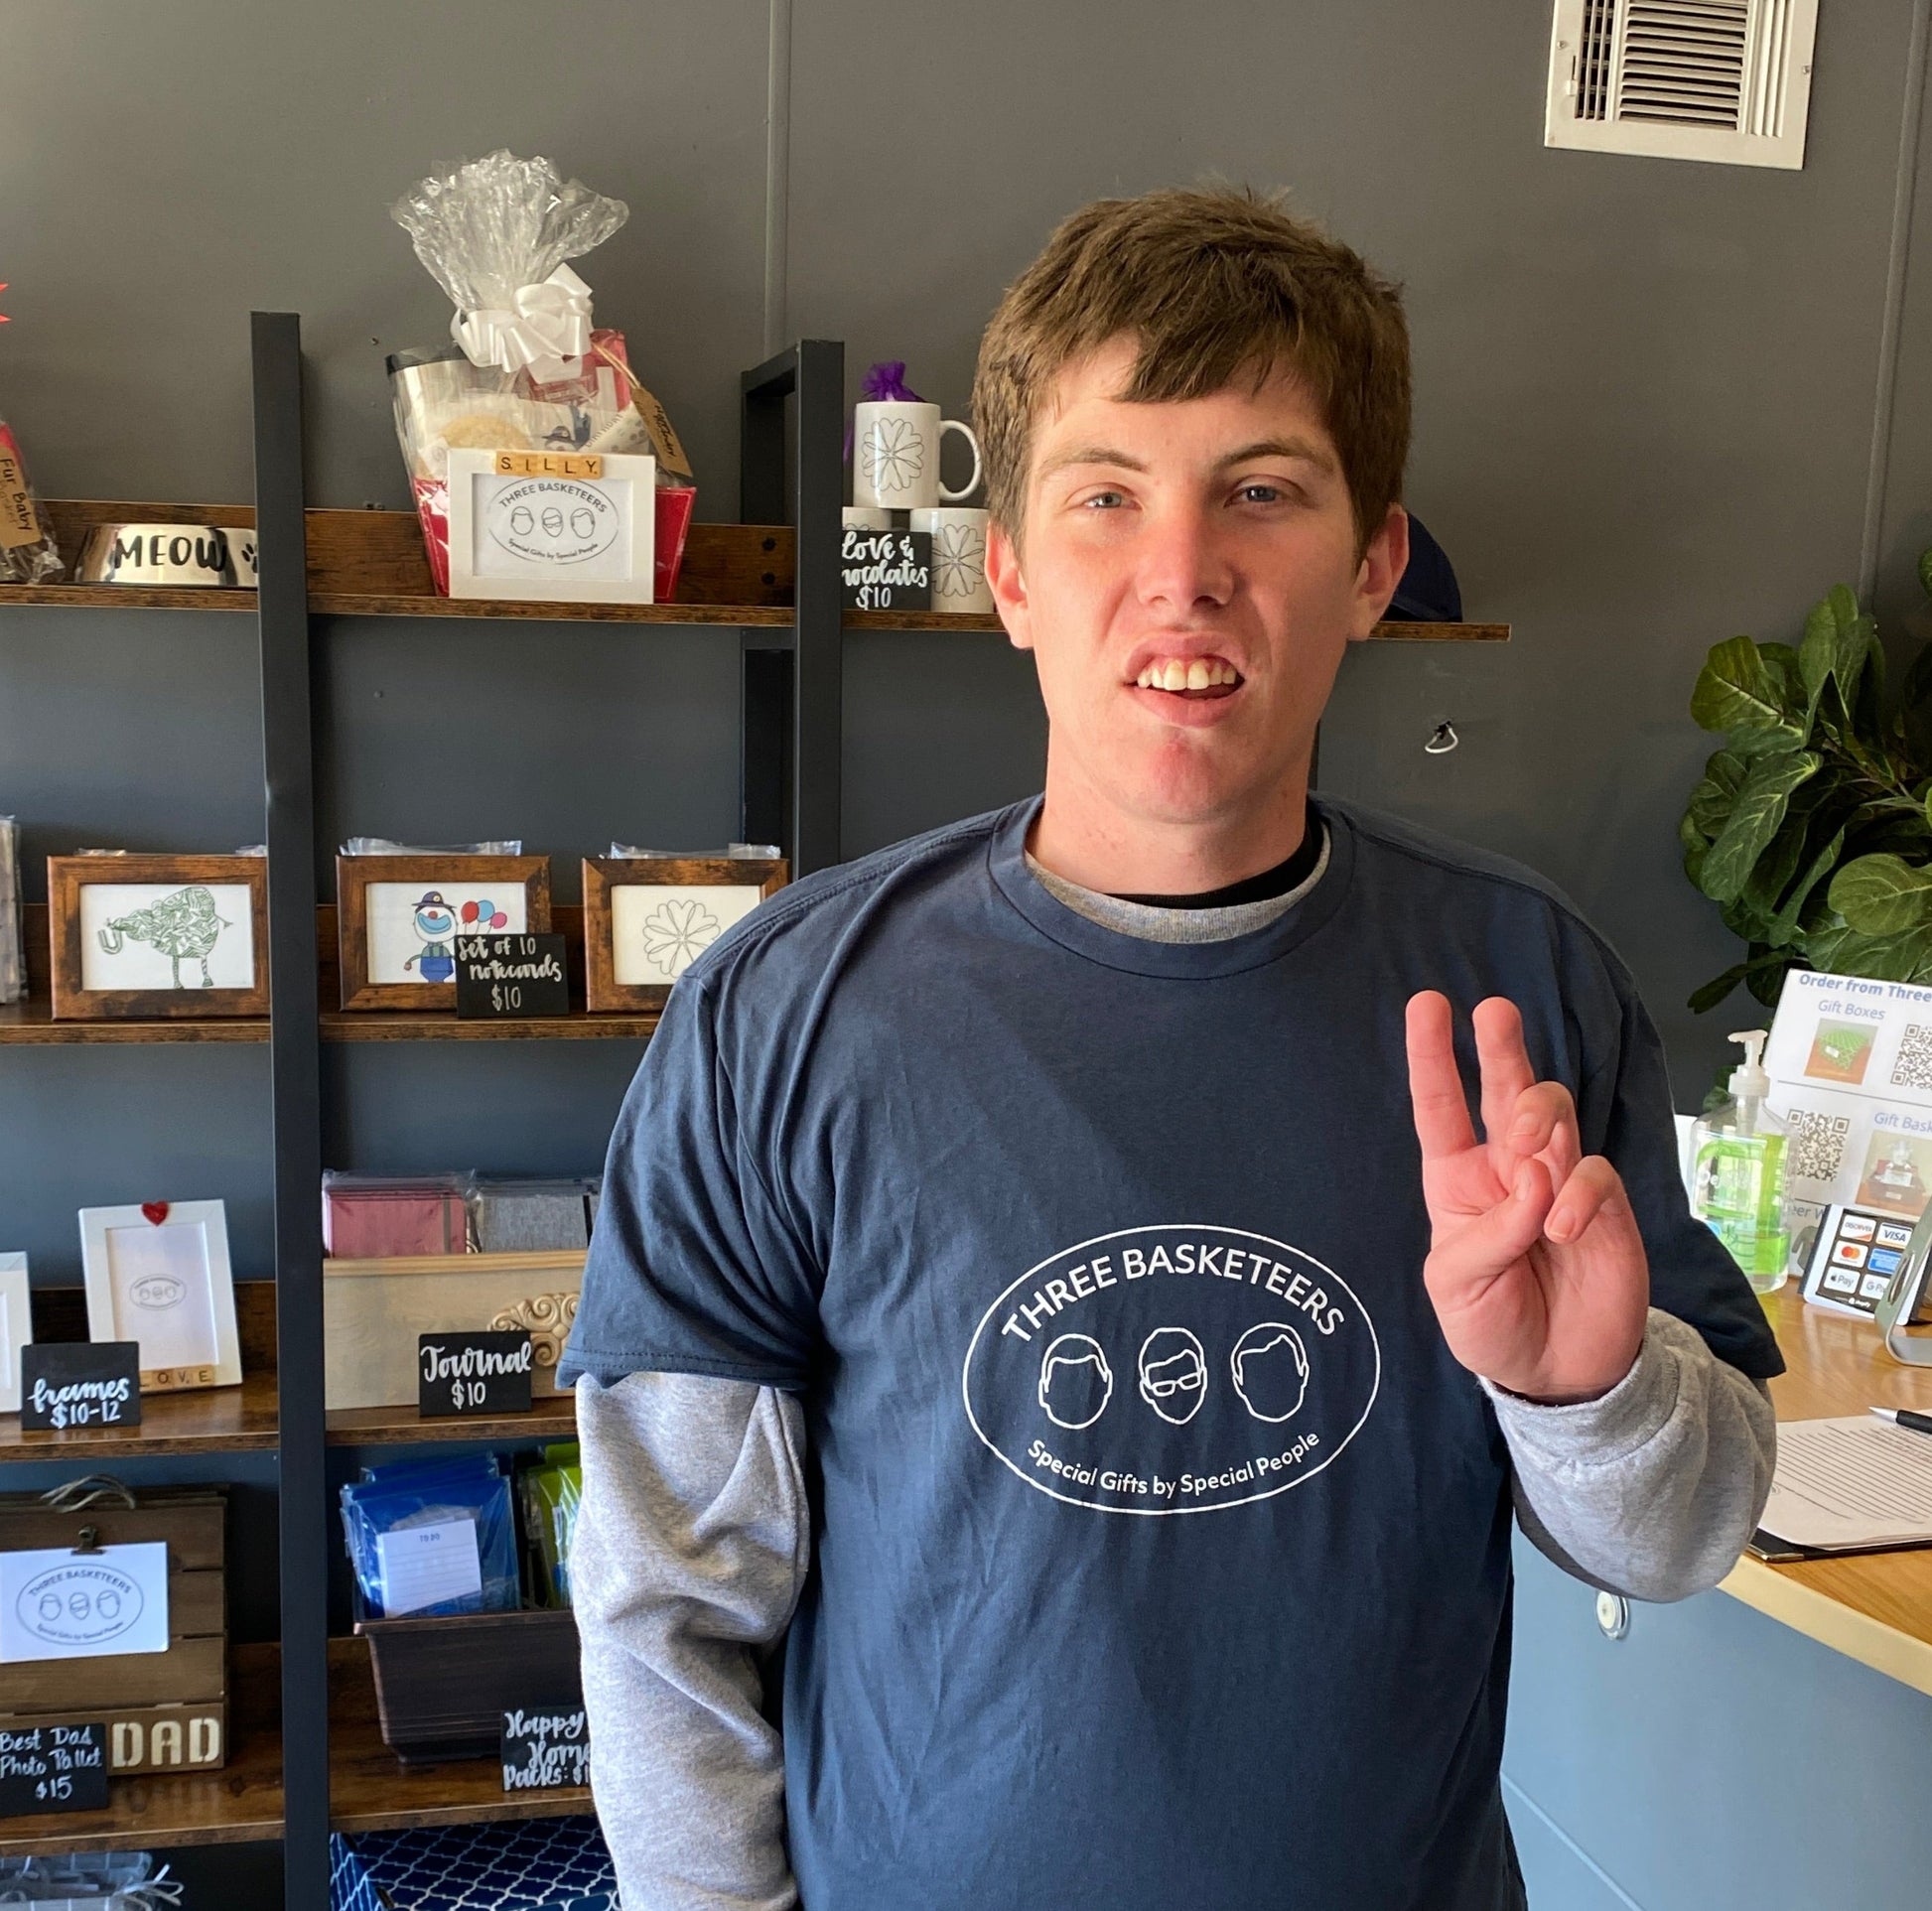 Basketeer Mark stands in our shop wearing an Indigo Blue t-shirt with a white Three Basketeers logo